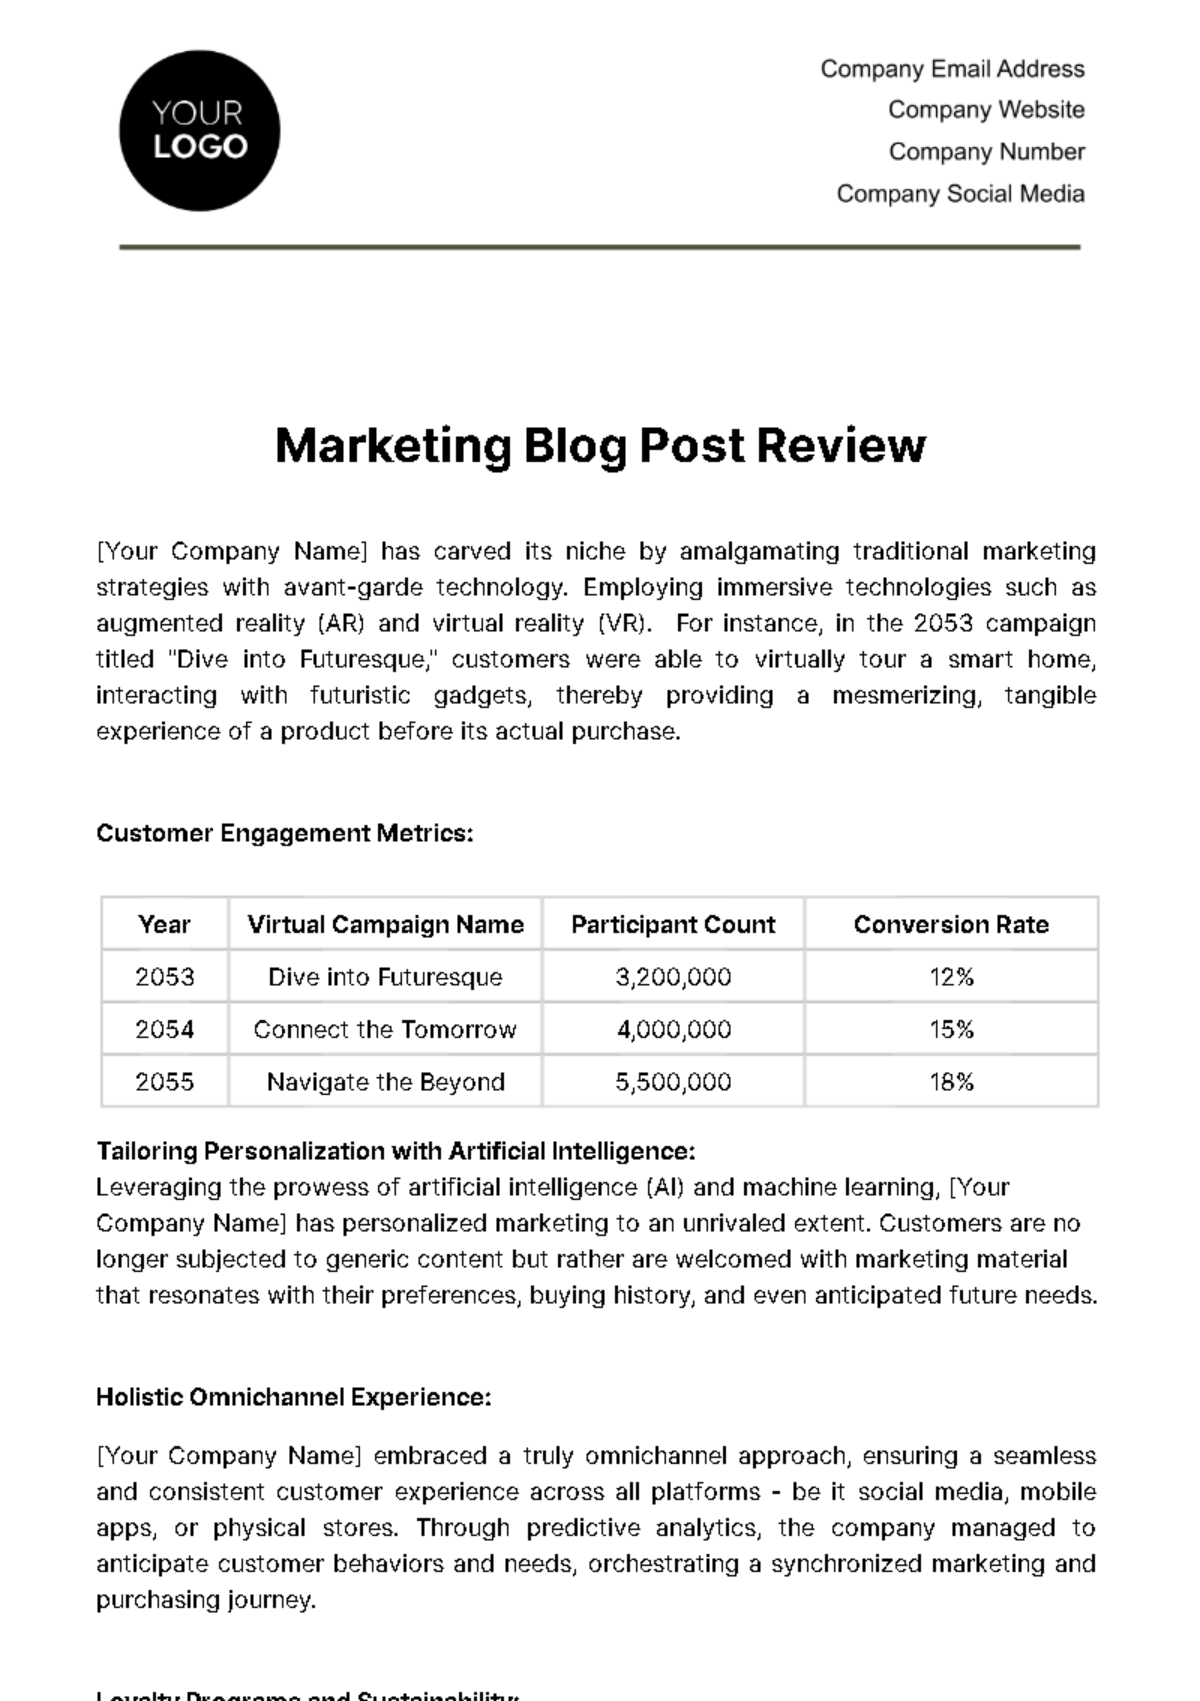 Marketing Blog Post Review Template